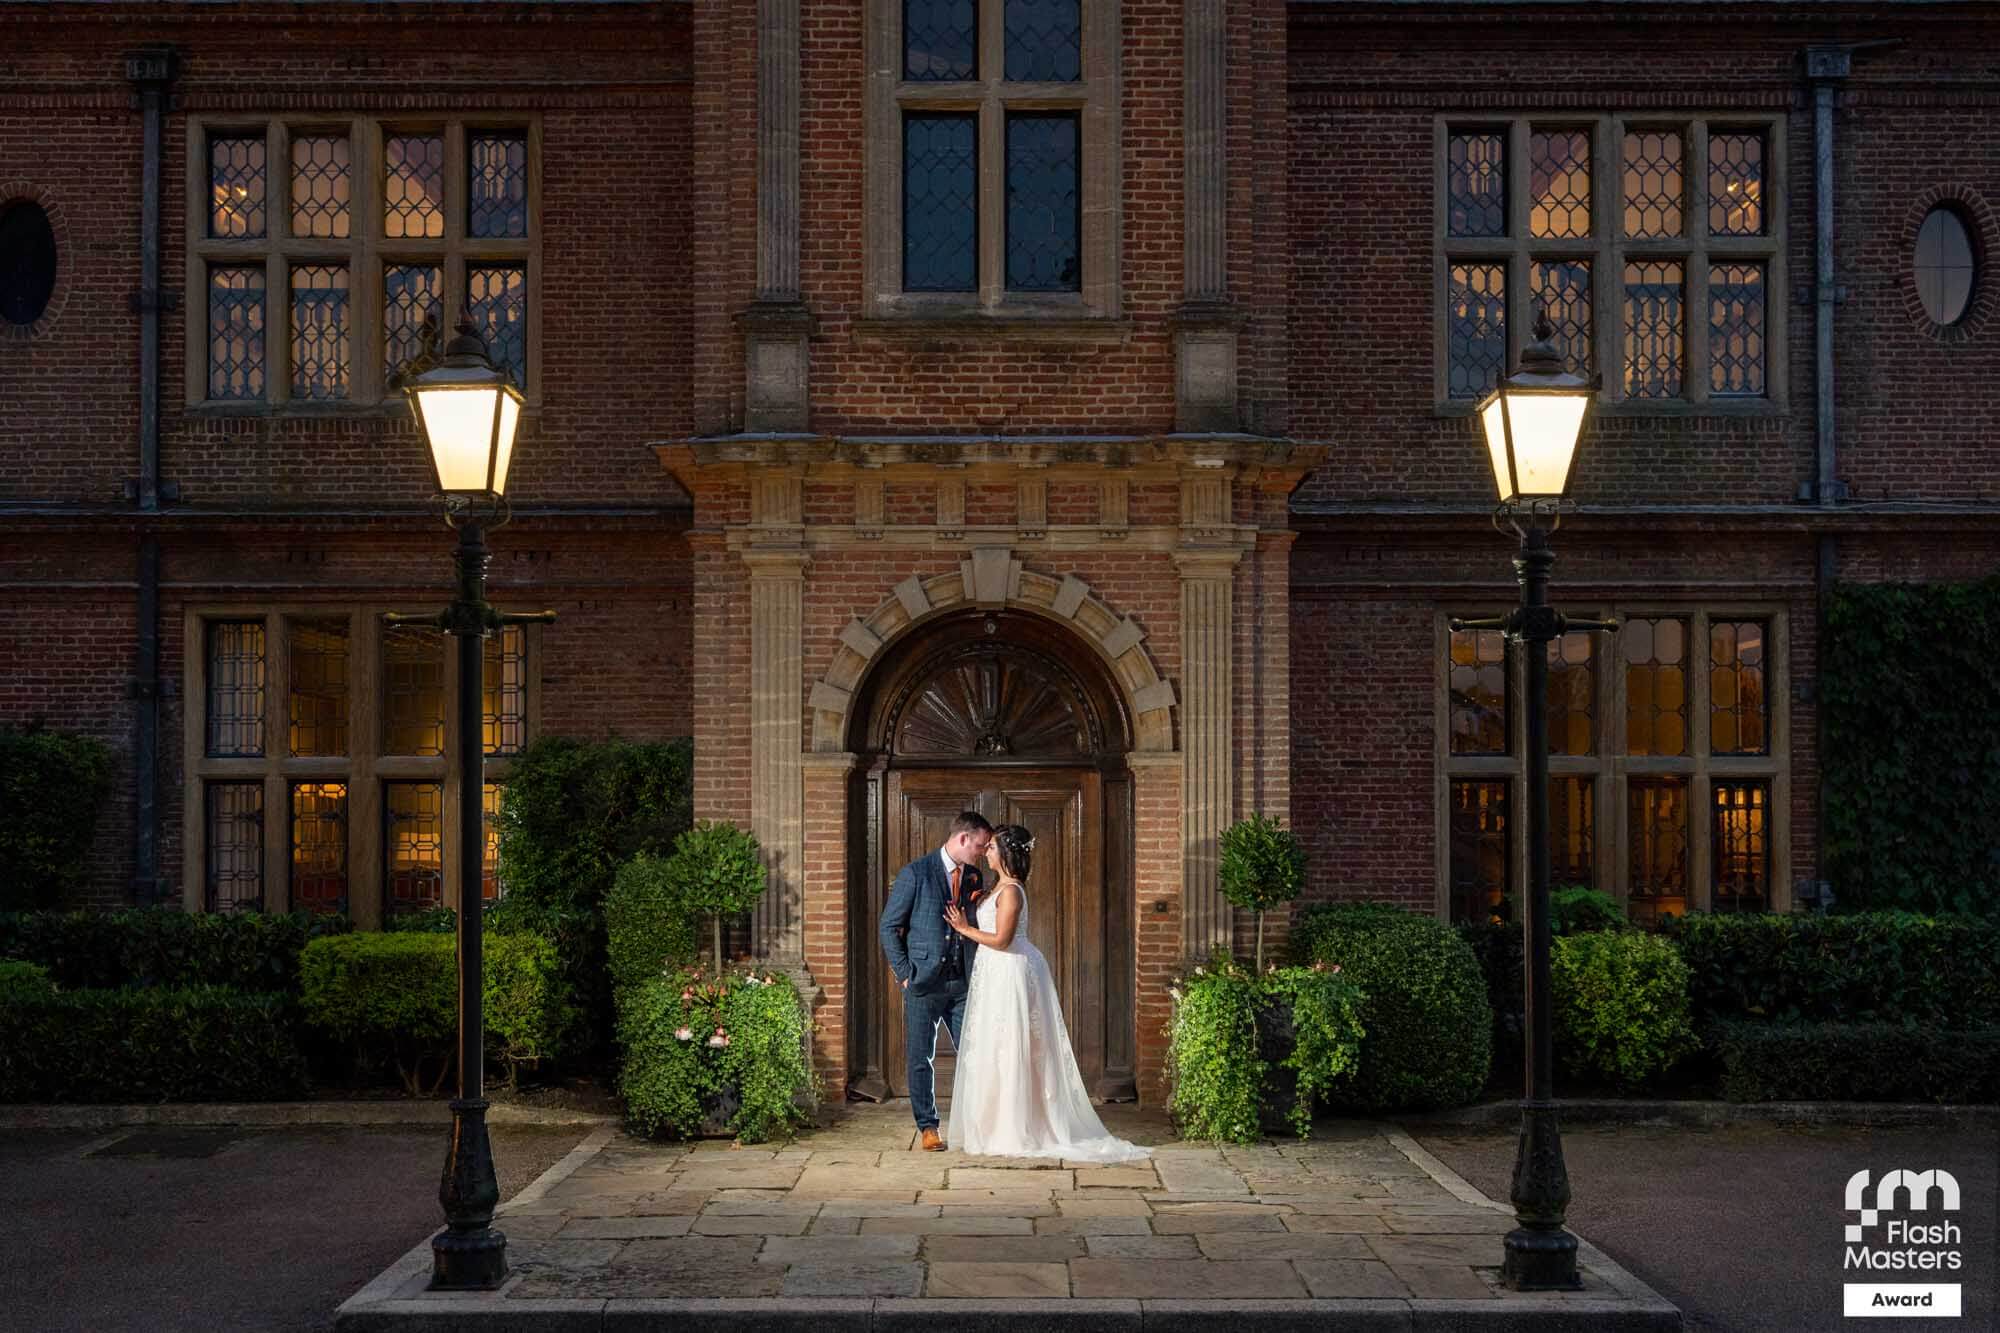 bride and groom stand close together in front of the wooden door of a mansion house in the evening, there are lit lamp posts either side of them